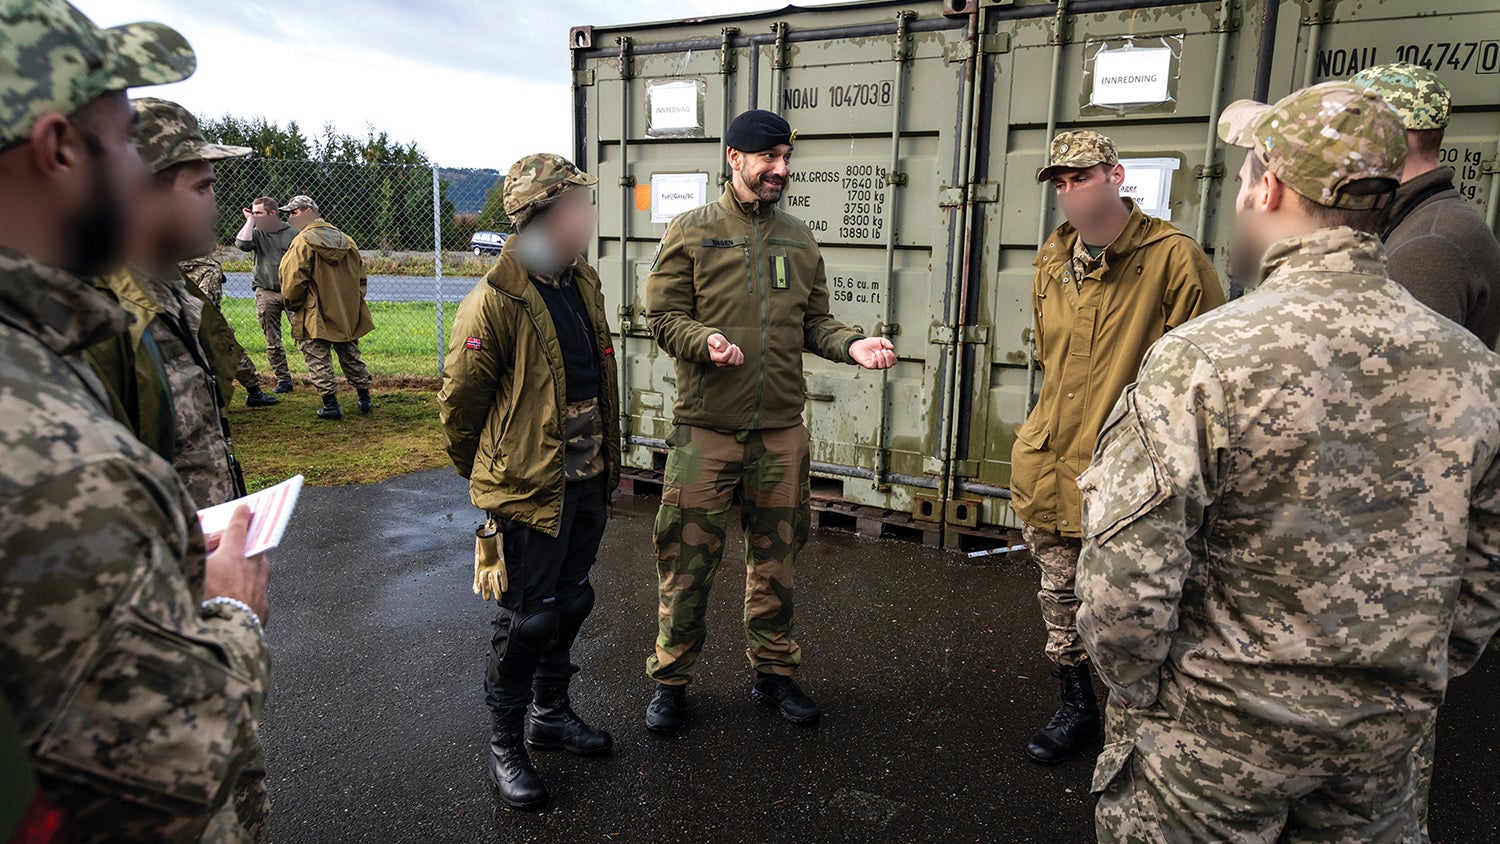 Norwegian Armed Forces Joint Medical Services instructors lead training near Trondheim, Norway, to help Ukrainian troops manage combat stress. The faces of Ukrainian participants are blurred to protect their identities. (Credit: Norwegian Home Guard/Kristian Kapelrud)